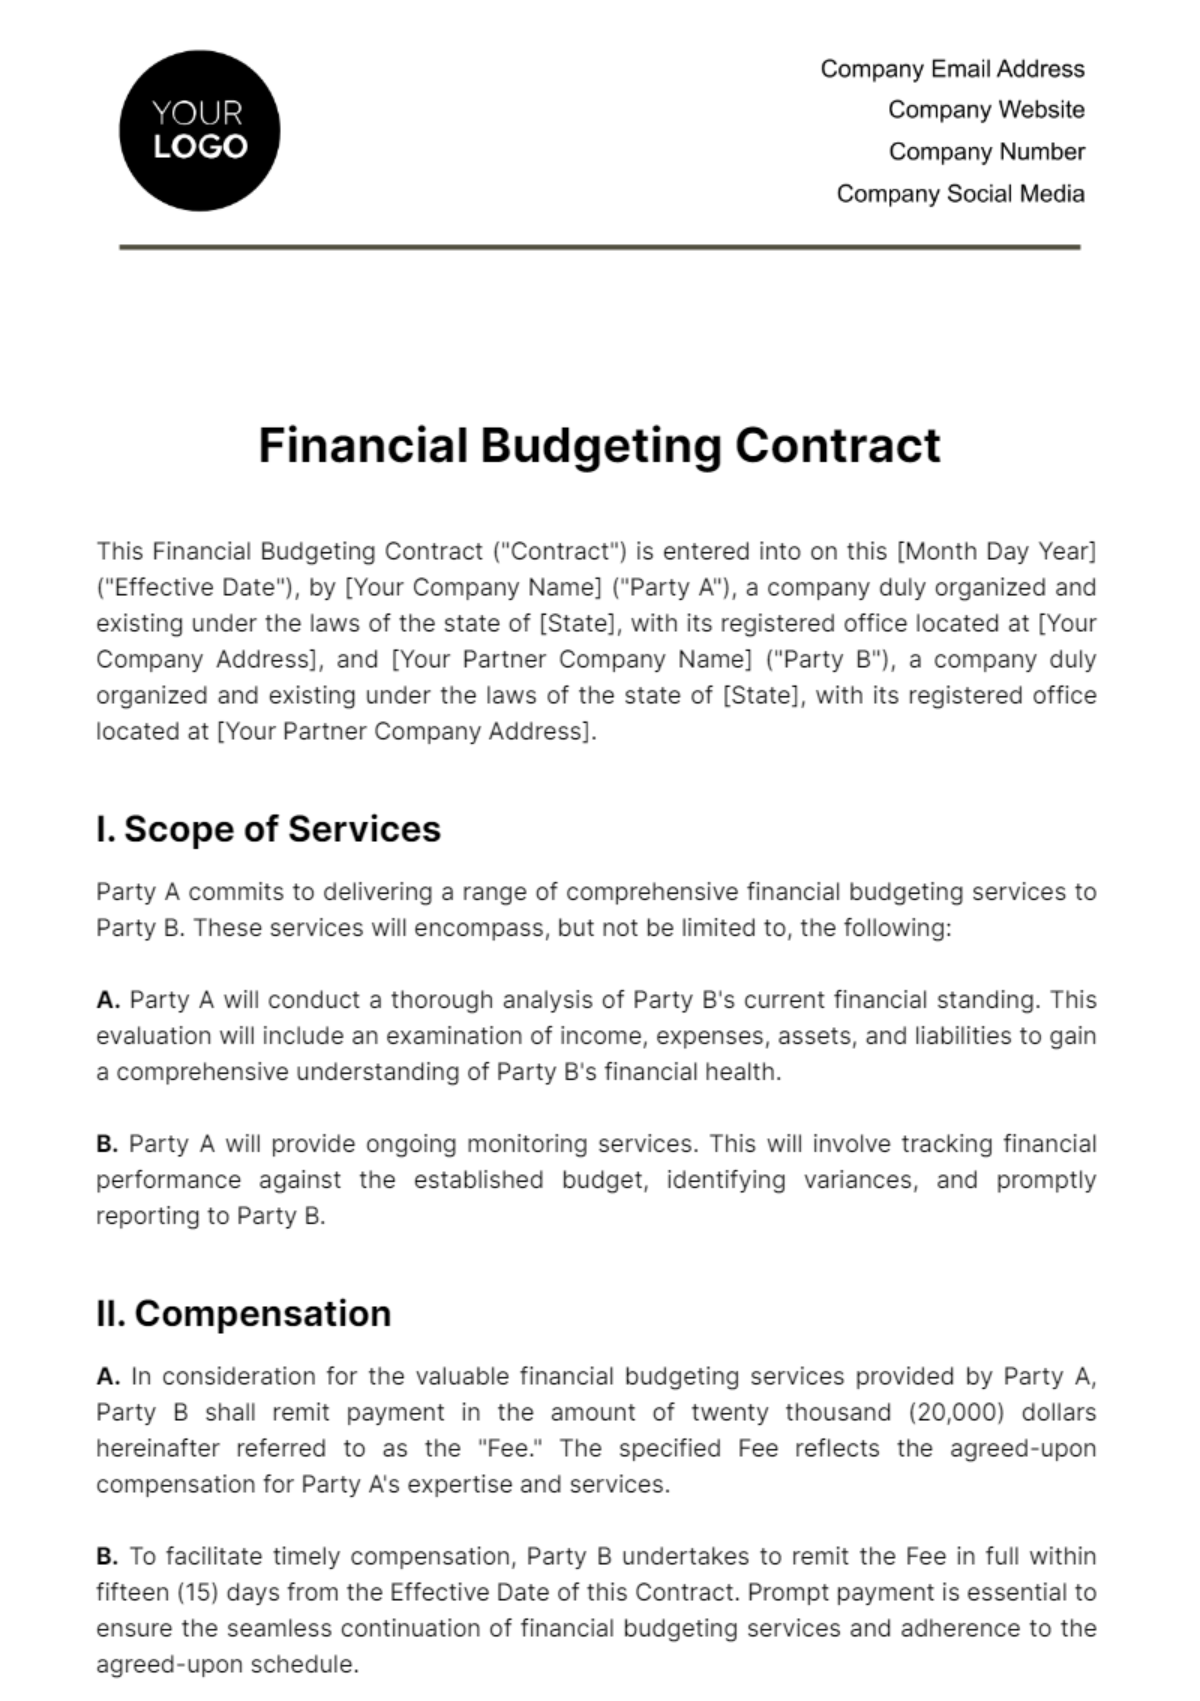 Free Financial Budgeting Contract Template